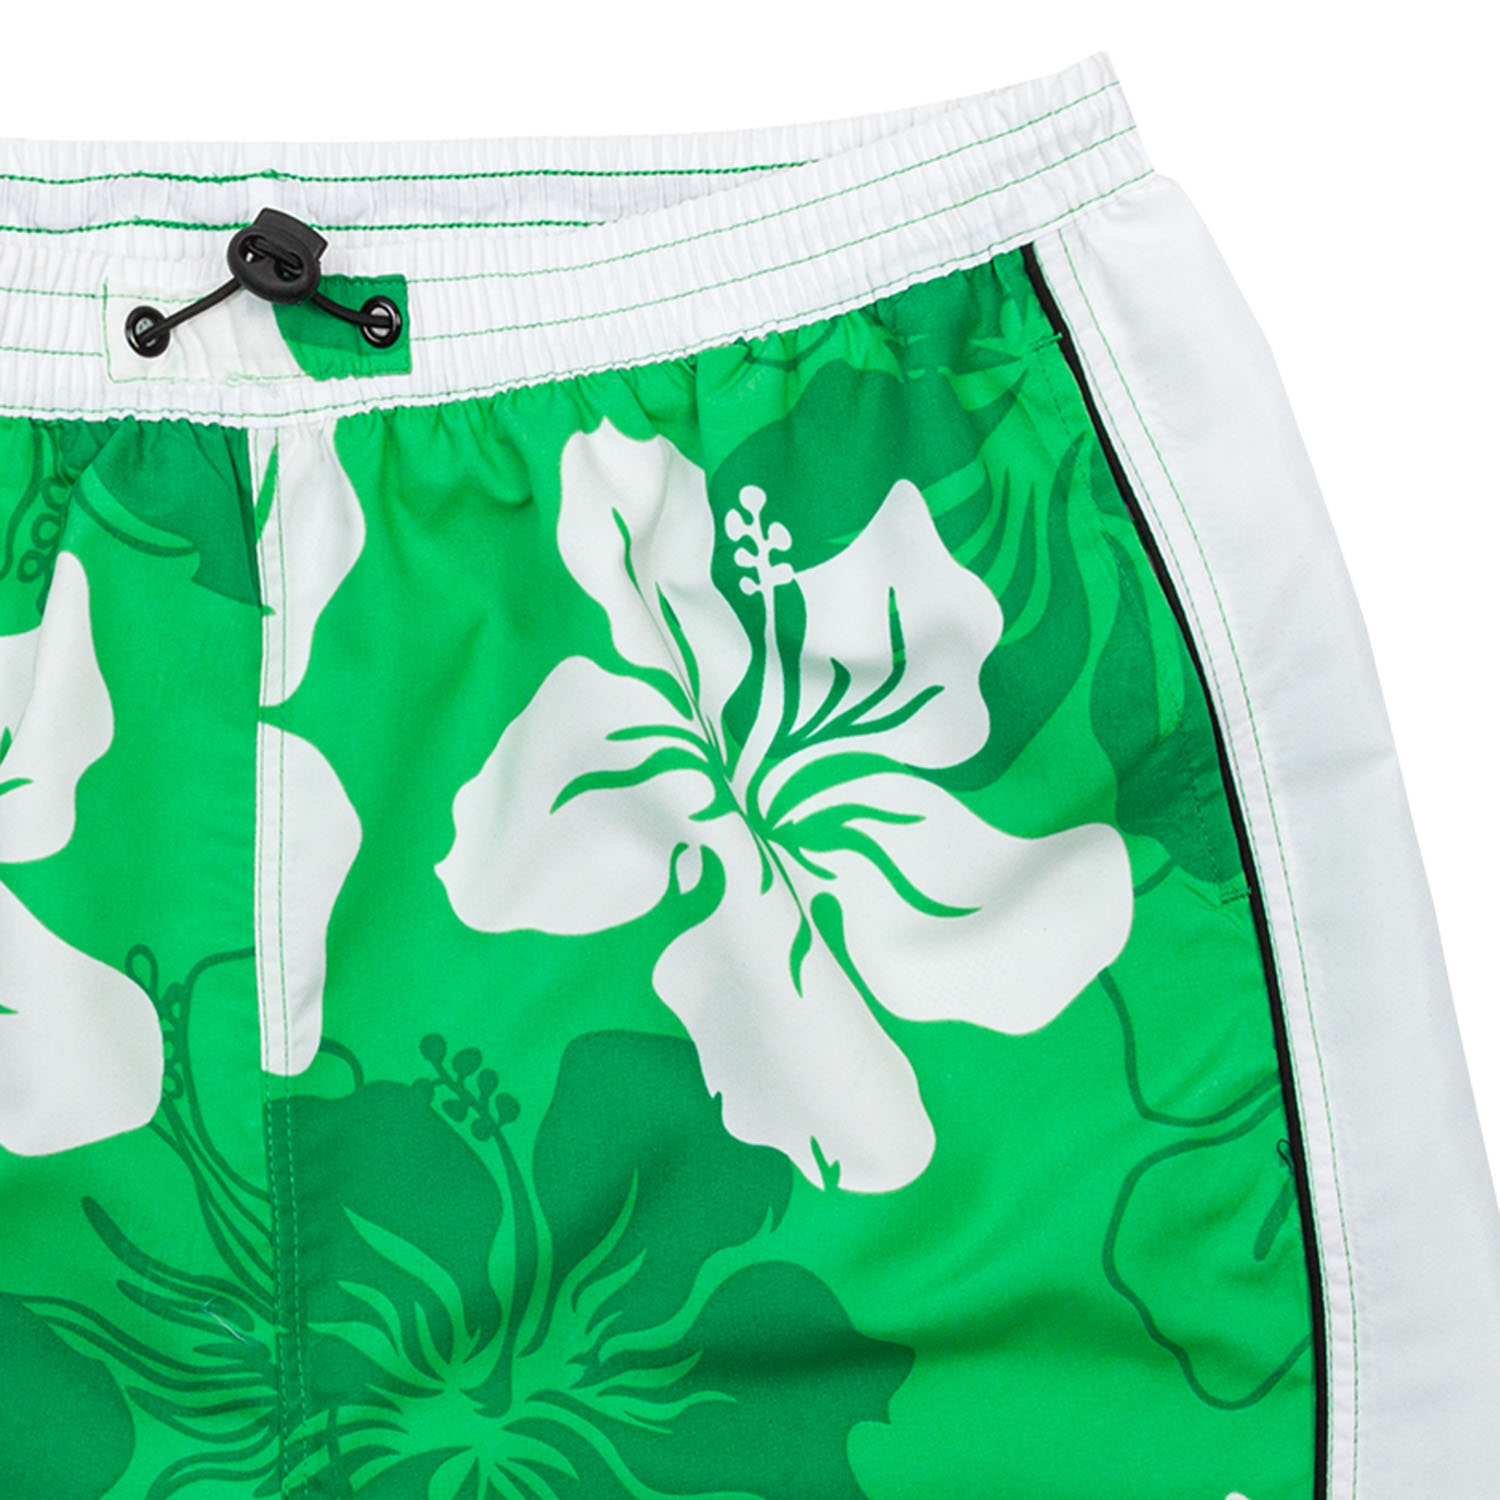 Swim shorts by eleMar for men green-white patterned in oversizes up to 6XL